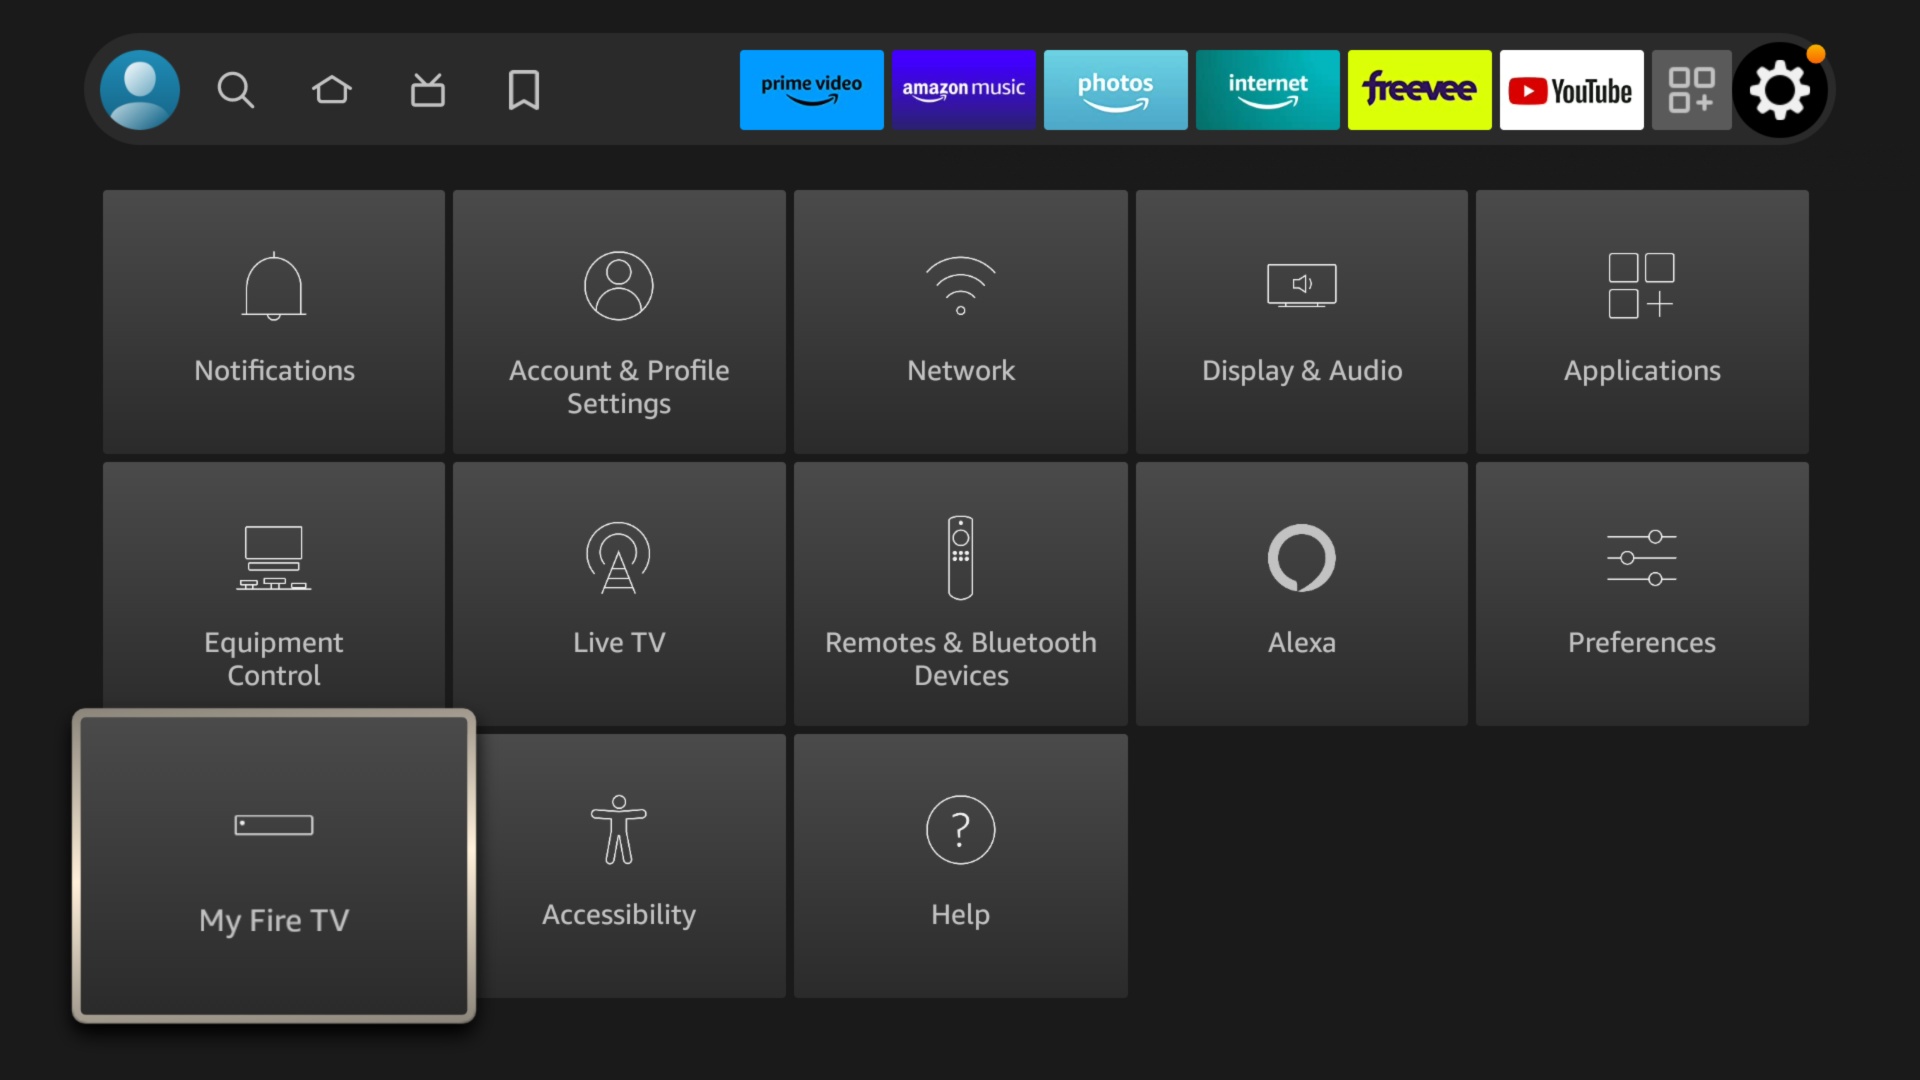 How to install unknown apps on Fire TV Stick?